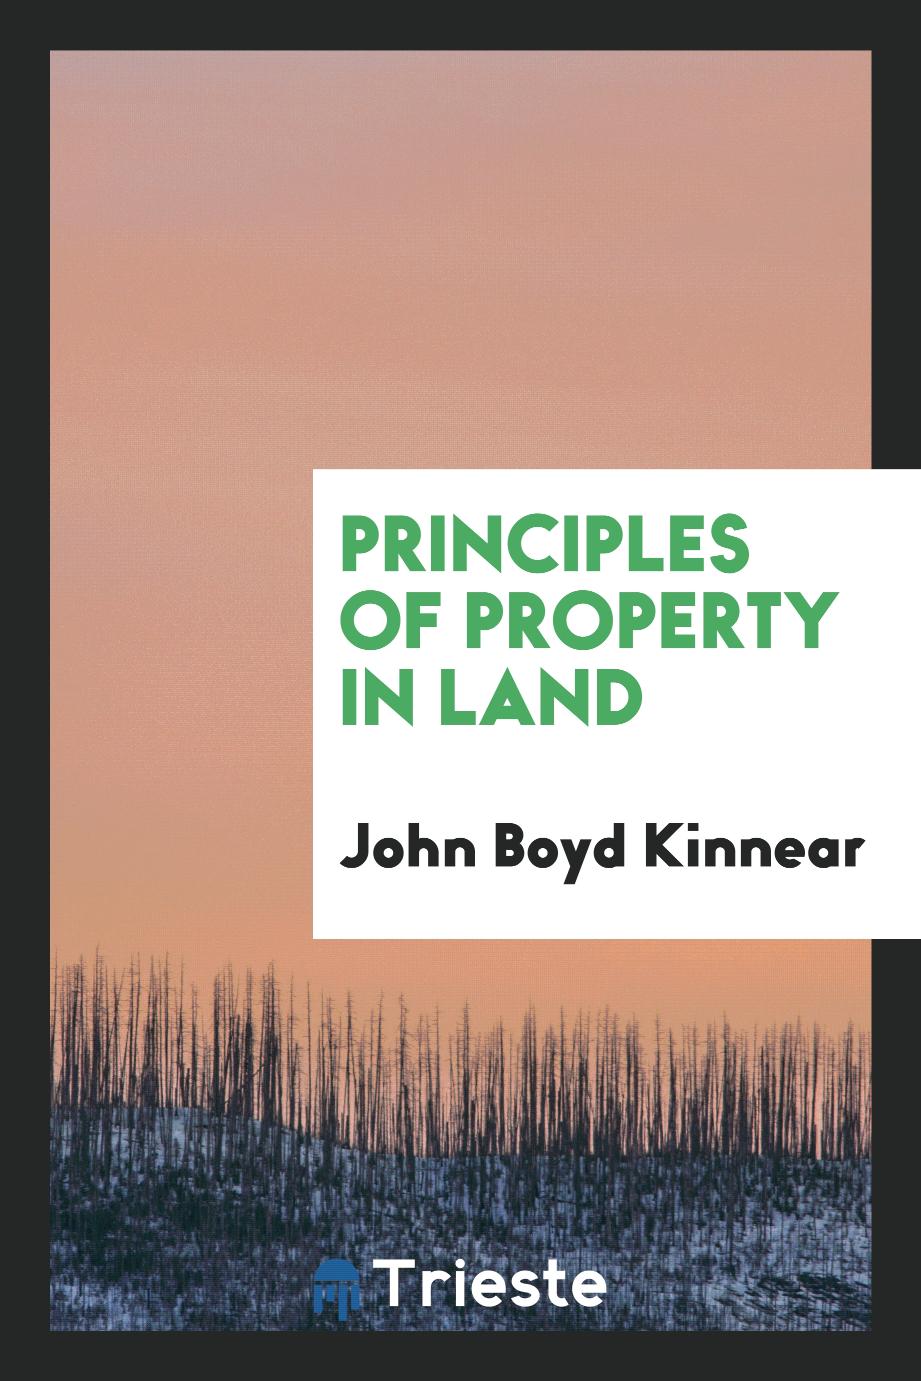 Principles of property in land